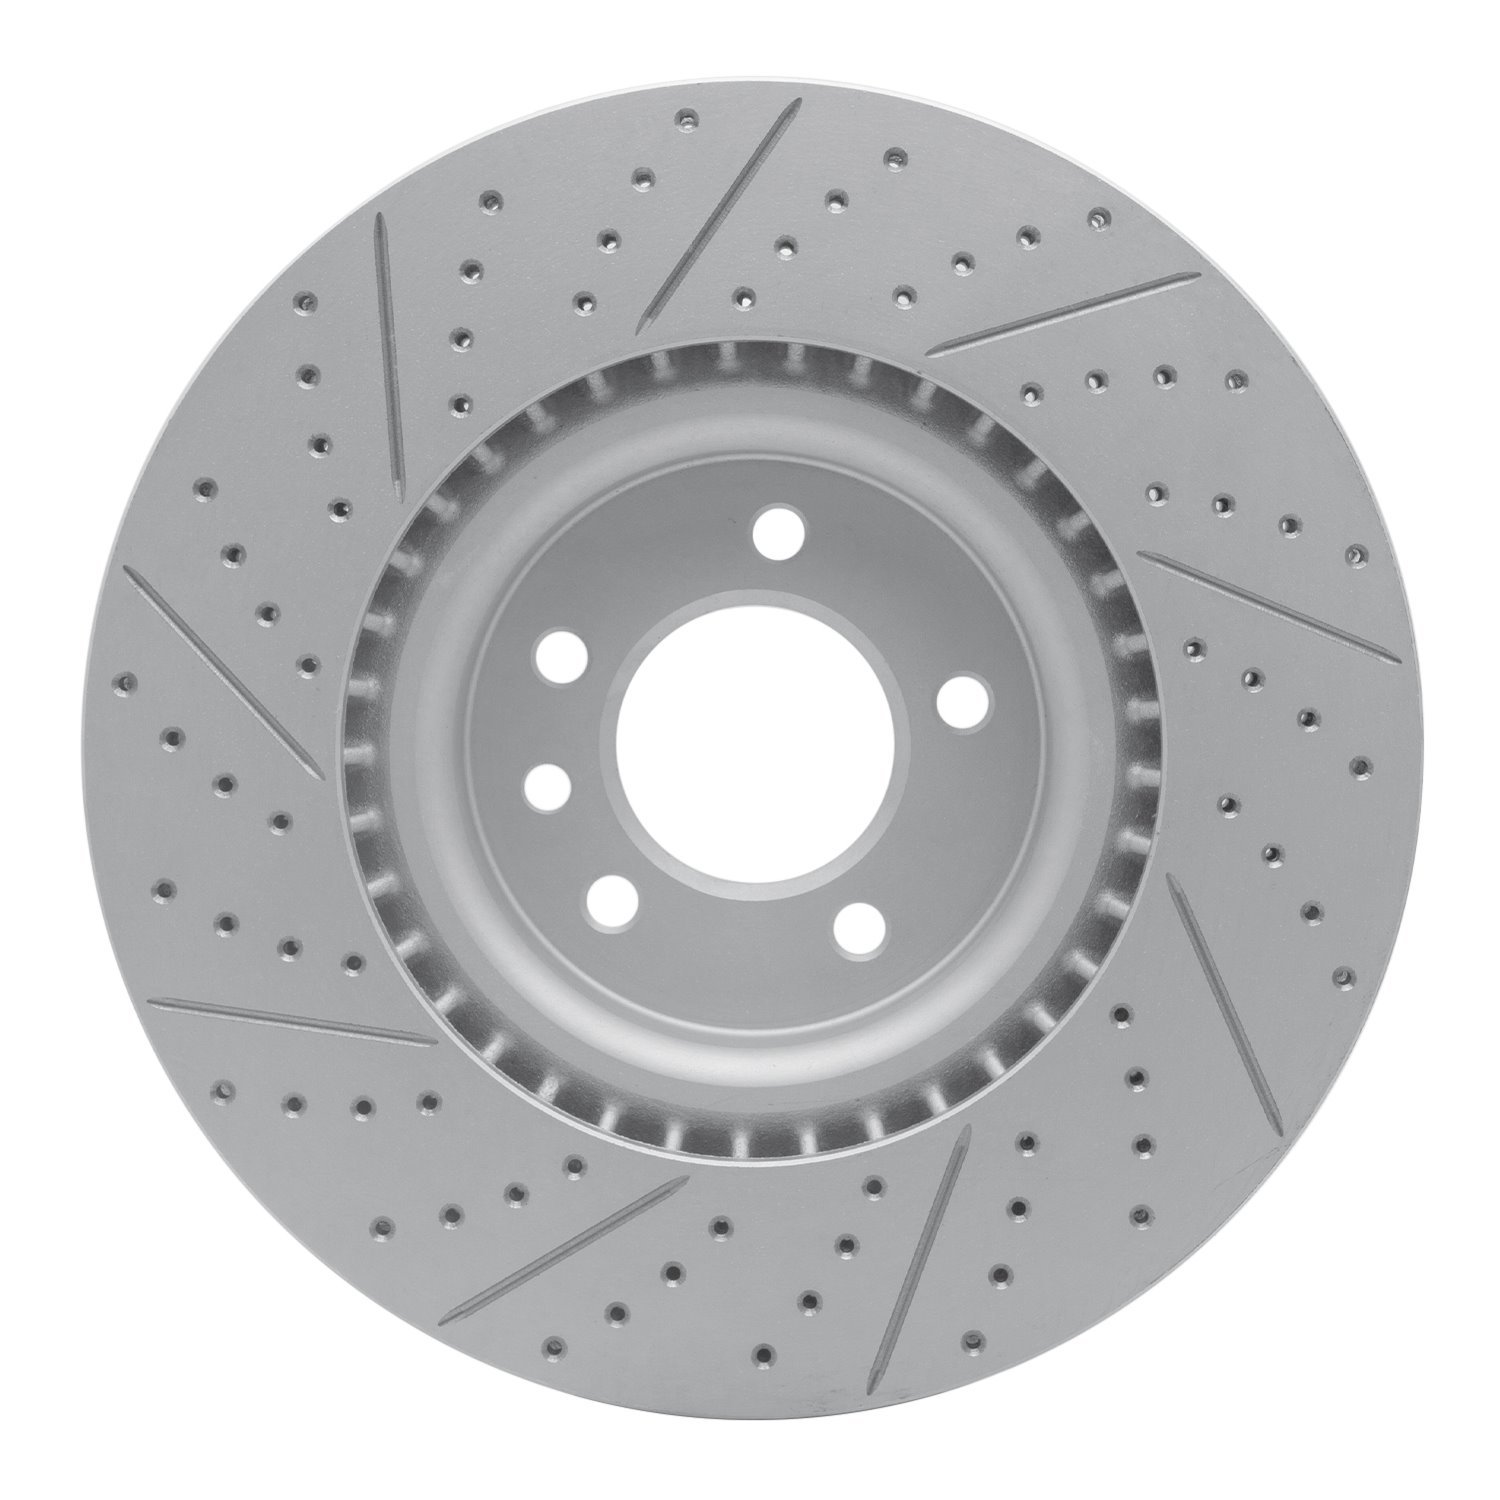 830-11032R Geoperformance Drilled/Slotted Brake Rotor, Fits Select Land Rover, Position: Front Right